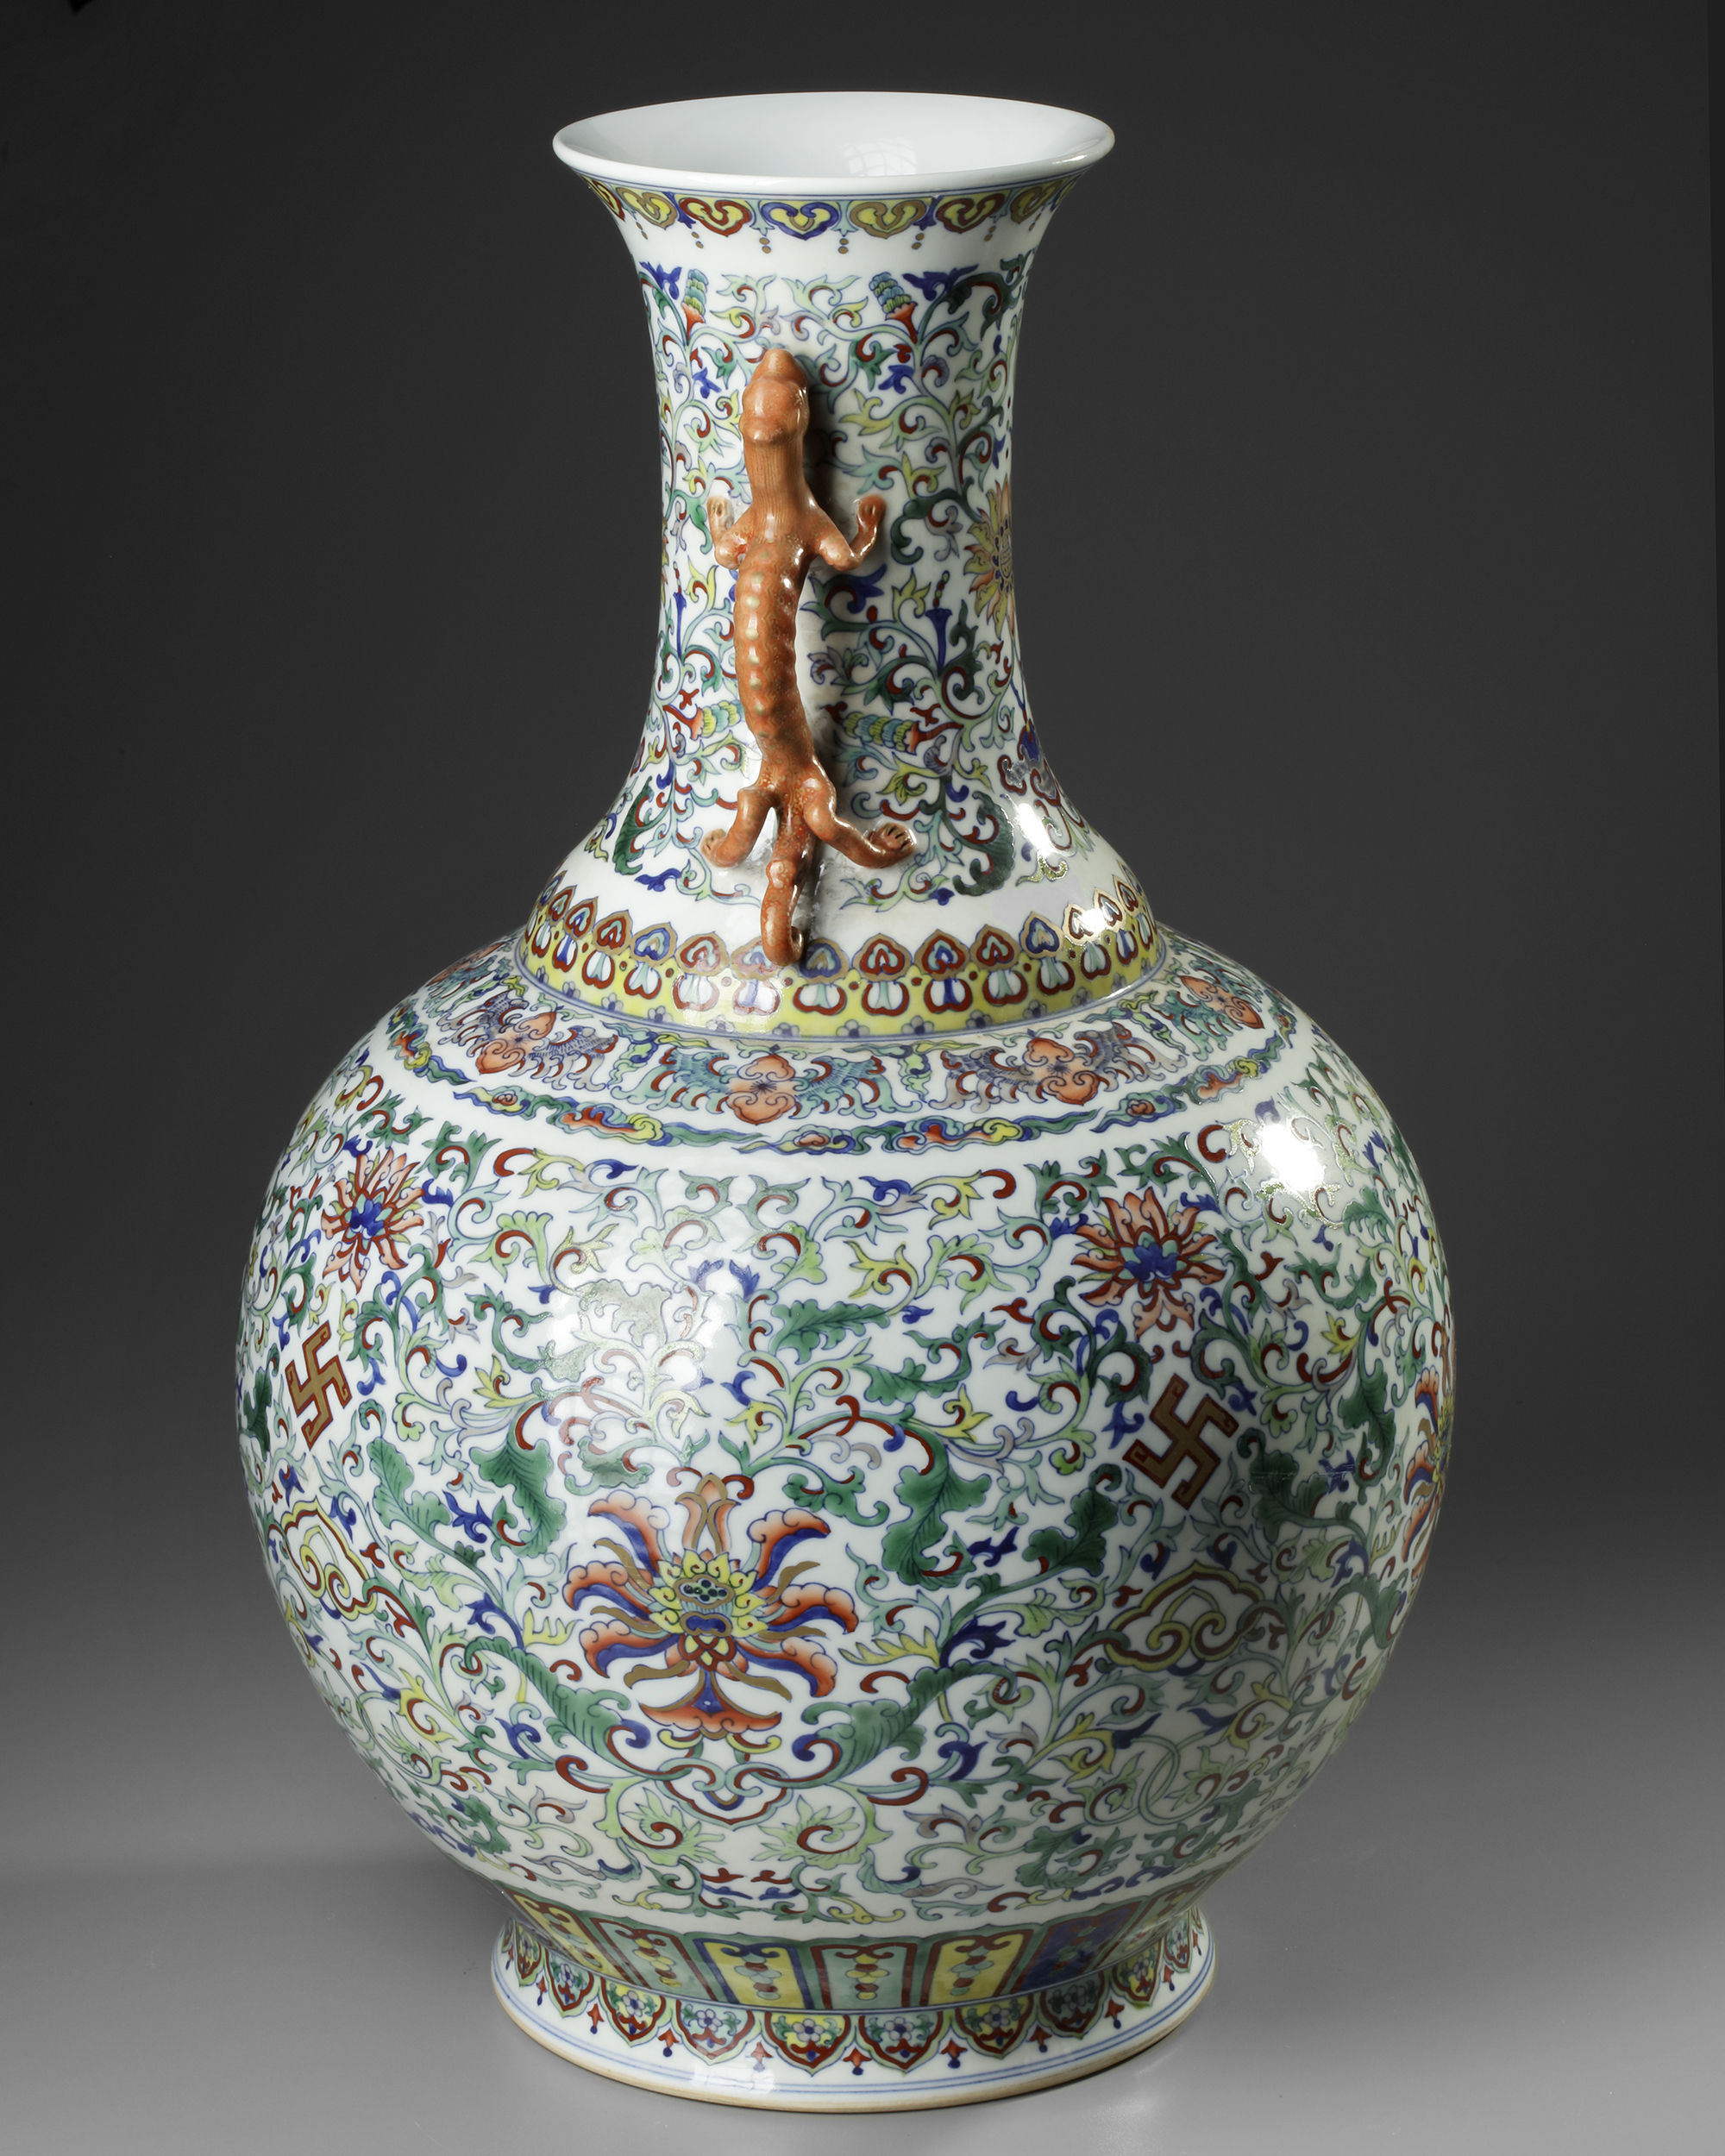 A LARGE CHINESE DOUCAI BOTTLE VASE, 19TH-20TH CENTURY - Image 3 of 5